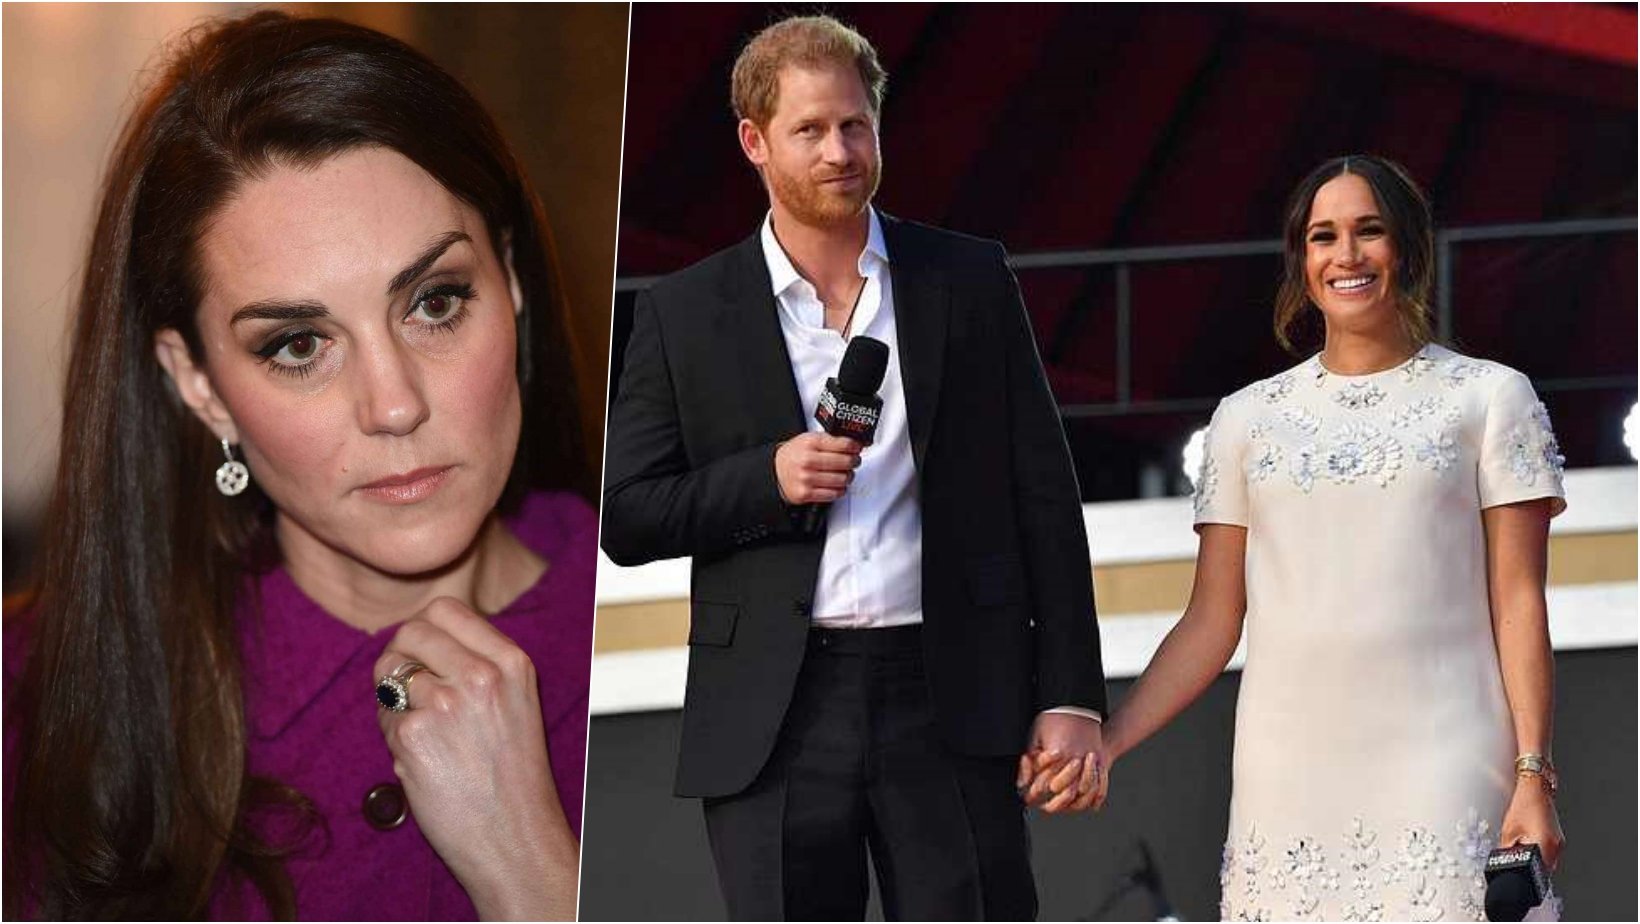 6 facebook cover 4.jpg?resize=412,232 - Kate Middleton Is “UPSET” Over Dispute Of The Royal Family With Prince Harry And Meghan Markle